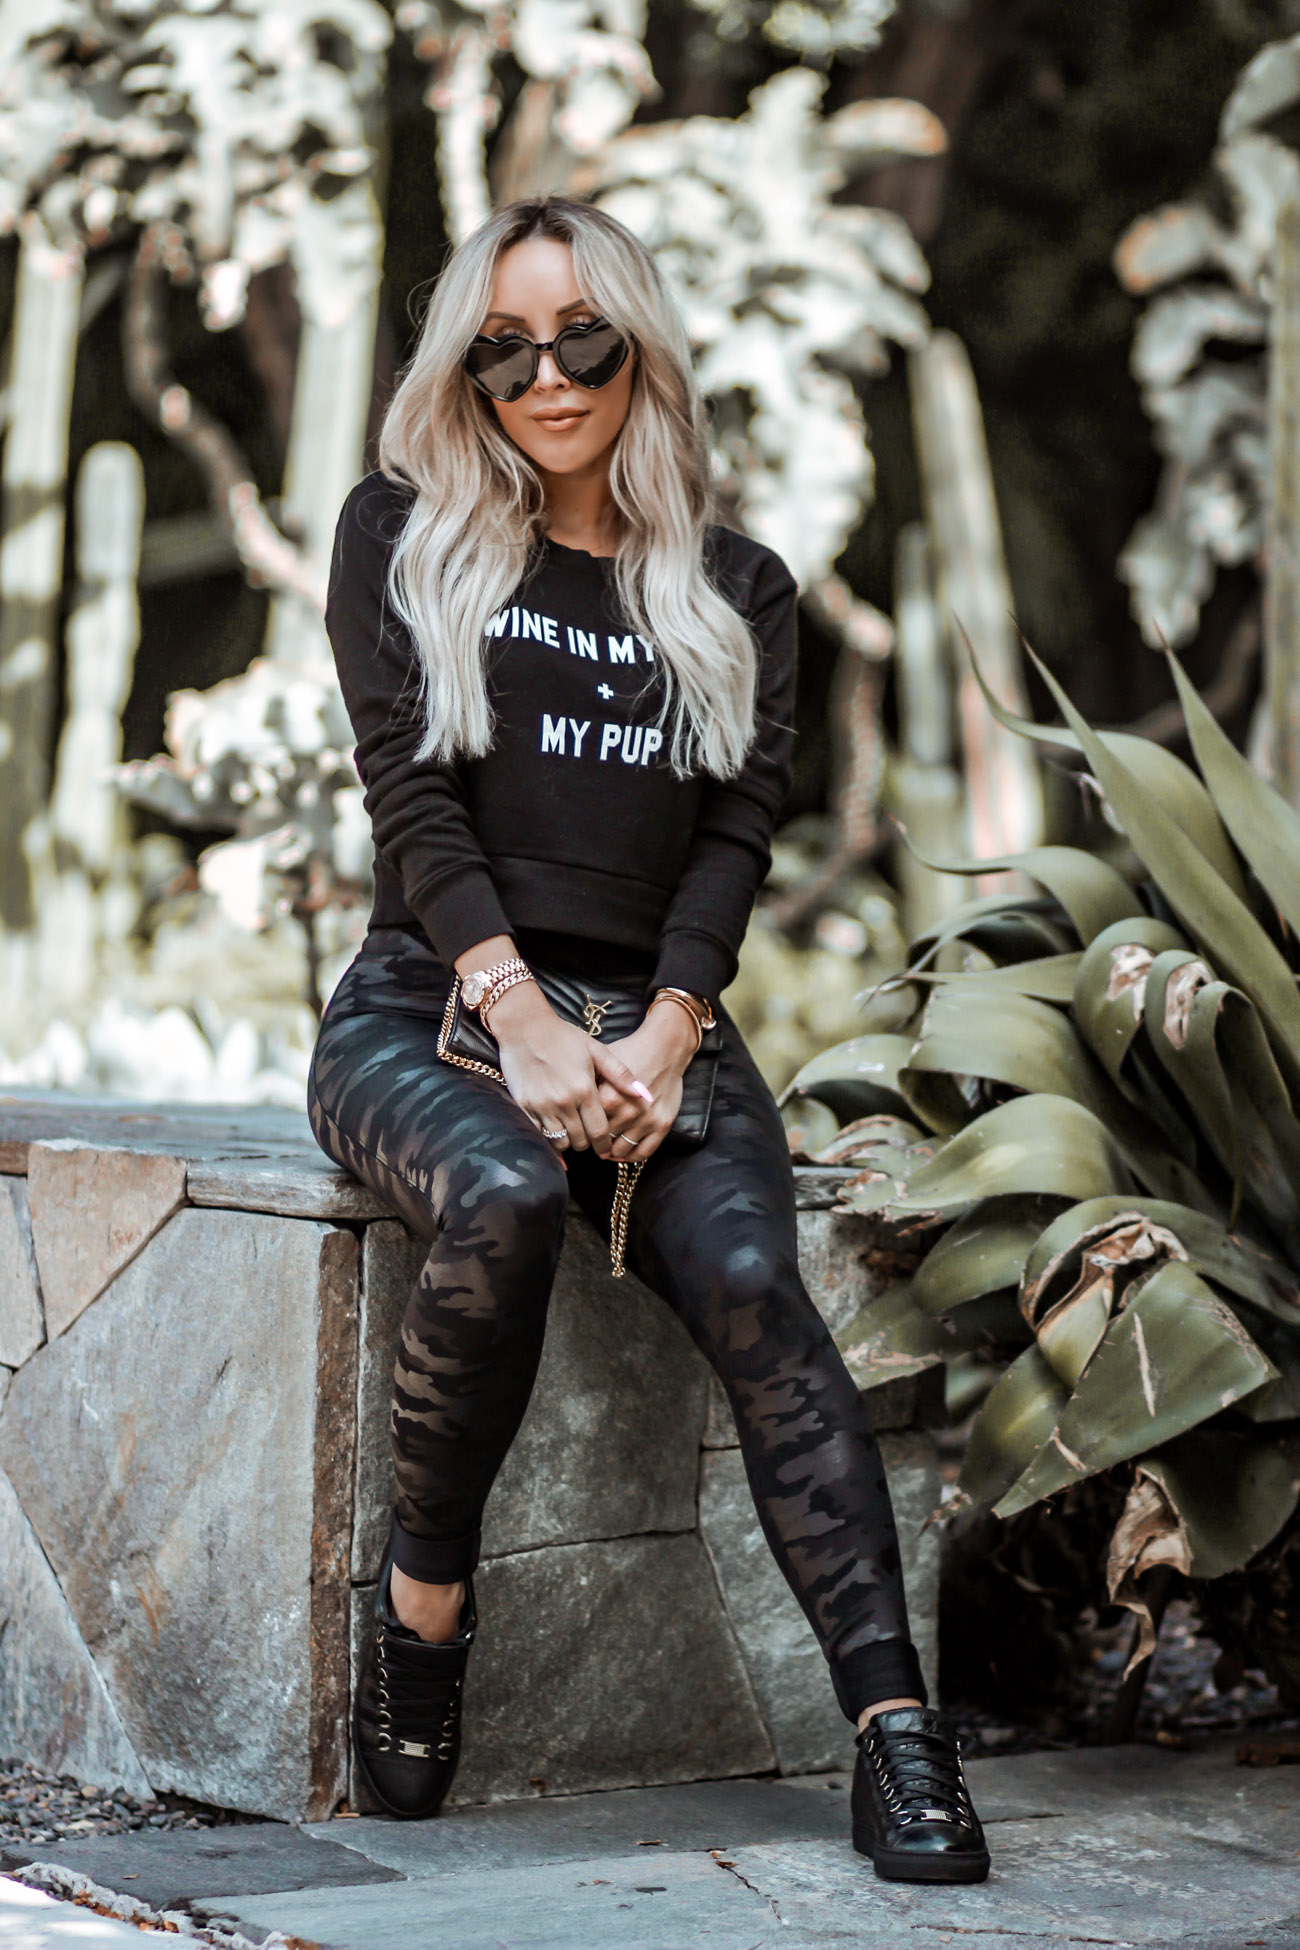 Wine in My Cup + My Pup | Wildfox tee's | Wildfox Couture | Balenciaga Sneakers  |  Black Camo Leggings  |  Blondie in the City by Hayley Larue